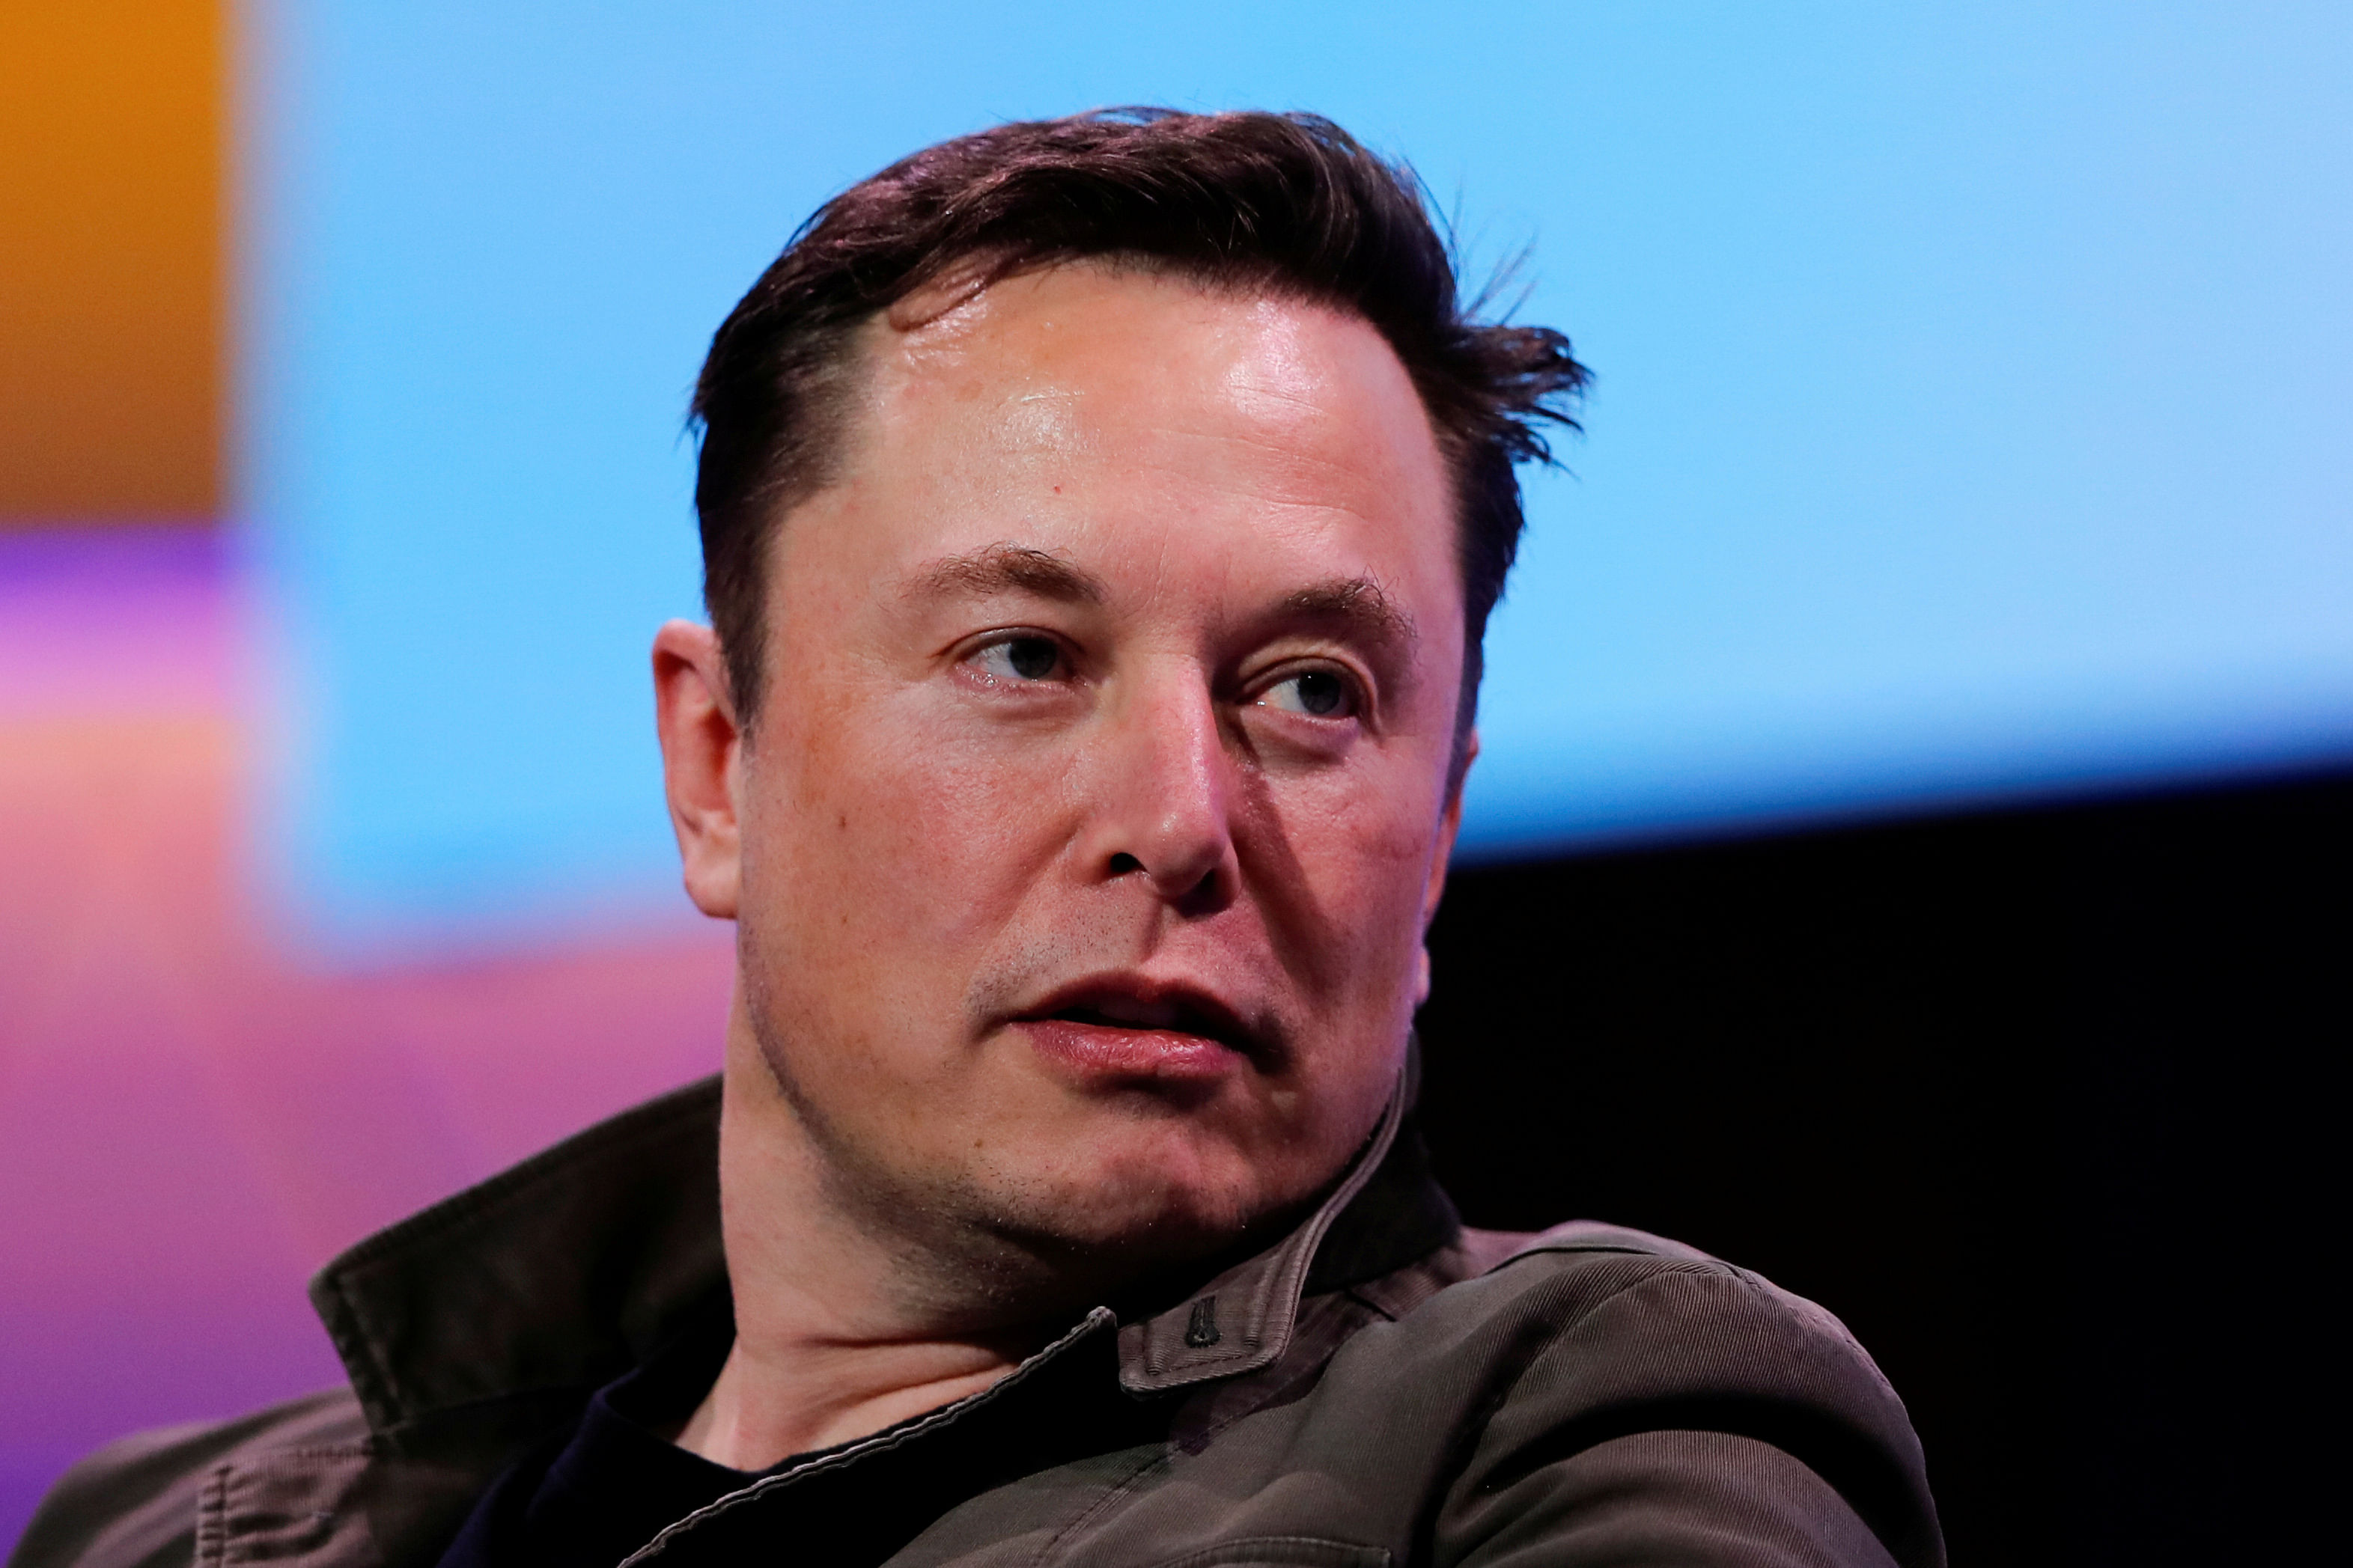 SpaceX owner and Tesla CEO Elon Musk. (Reuters Photo)